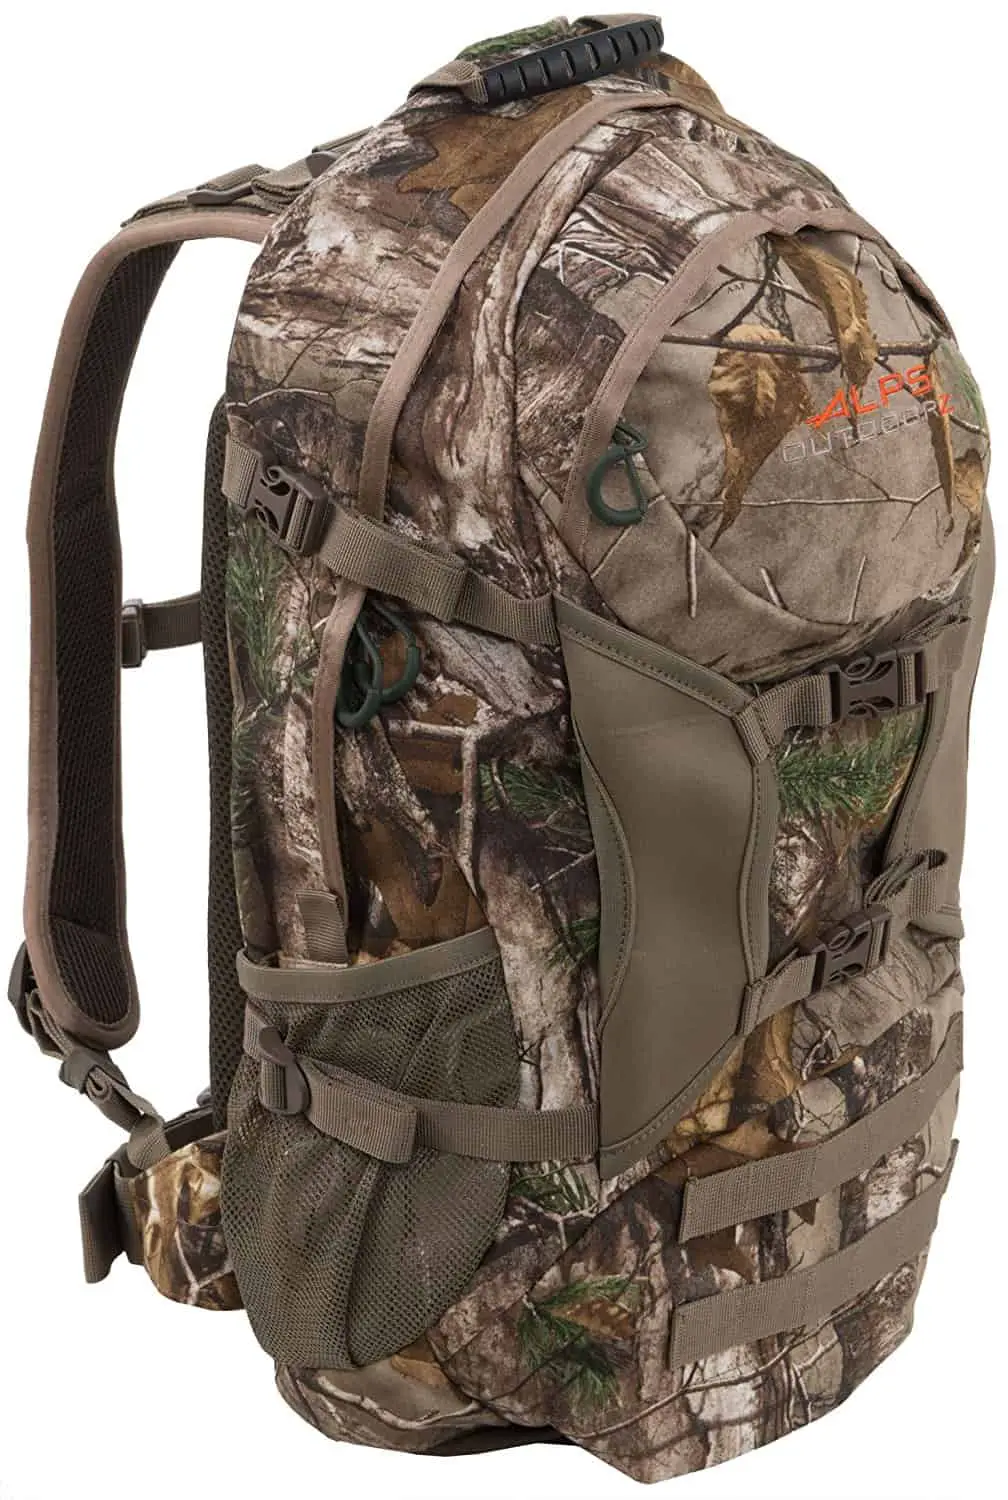 ALPS OutdoorZ Trailblazer Hunting Pack Review